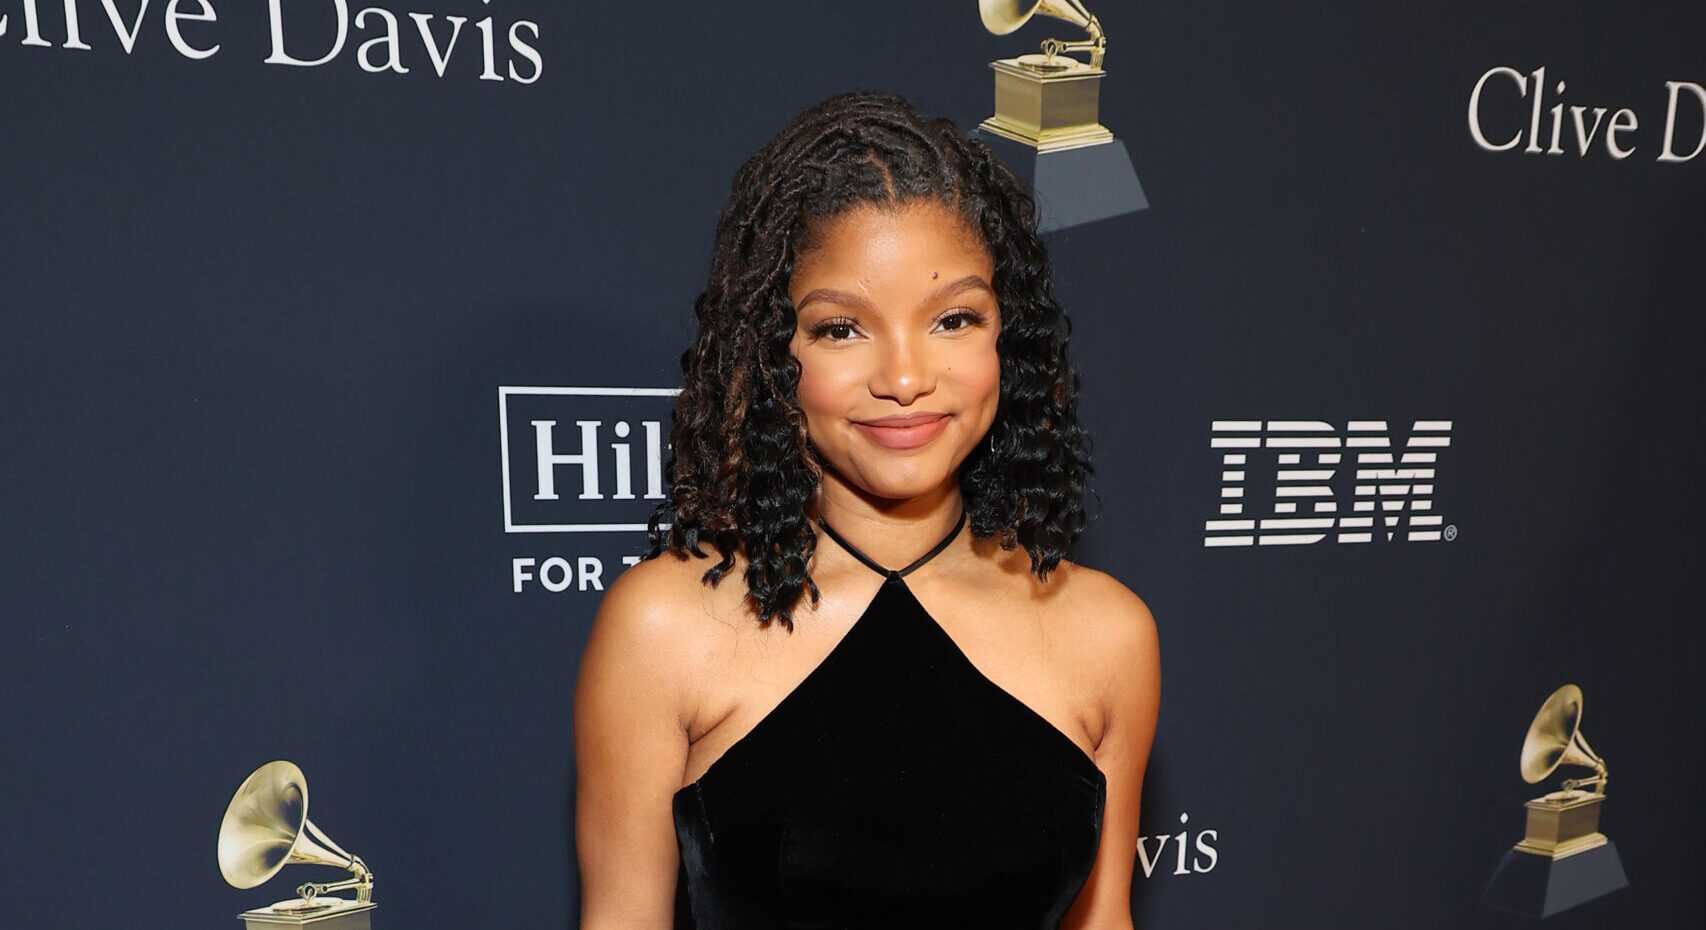 Halle Bailey captures the spotlight at the Pre-Grammy Gala, wearing a stunning black velvet Gucci dress with high splits and silk duchesse straps.